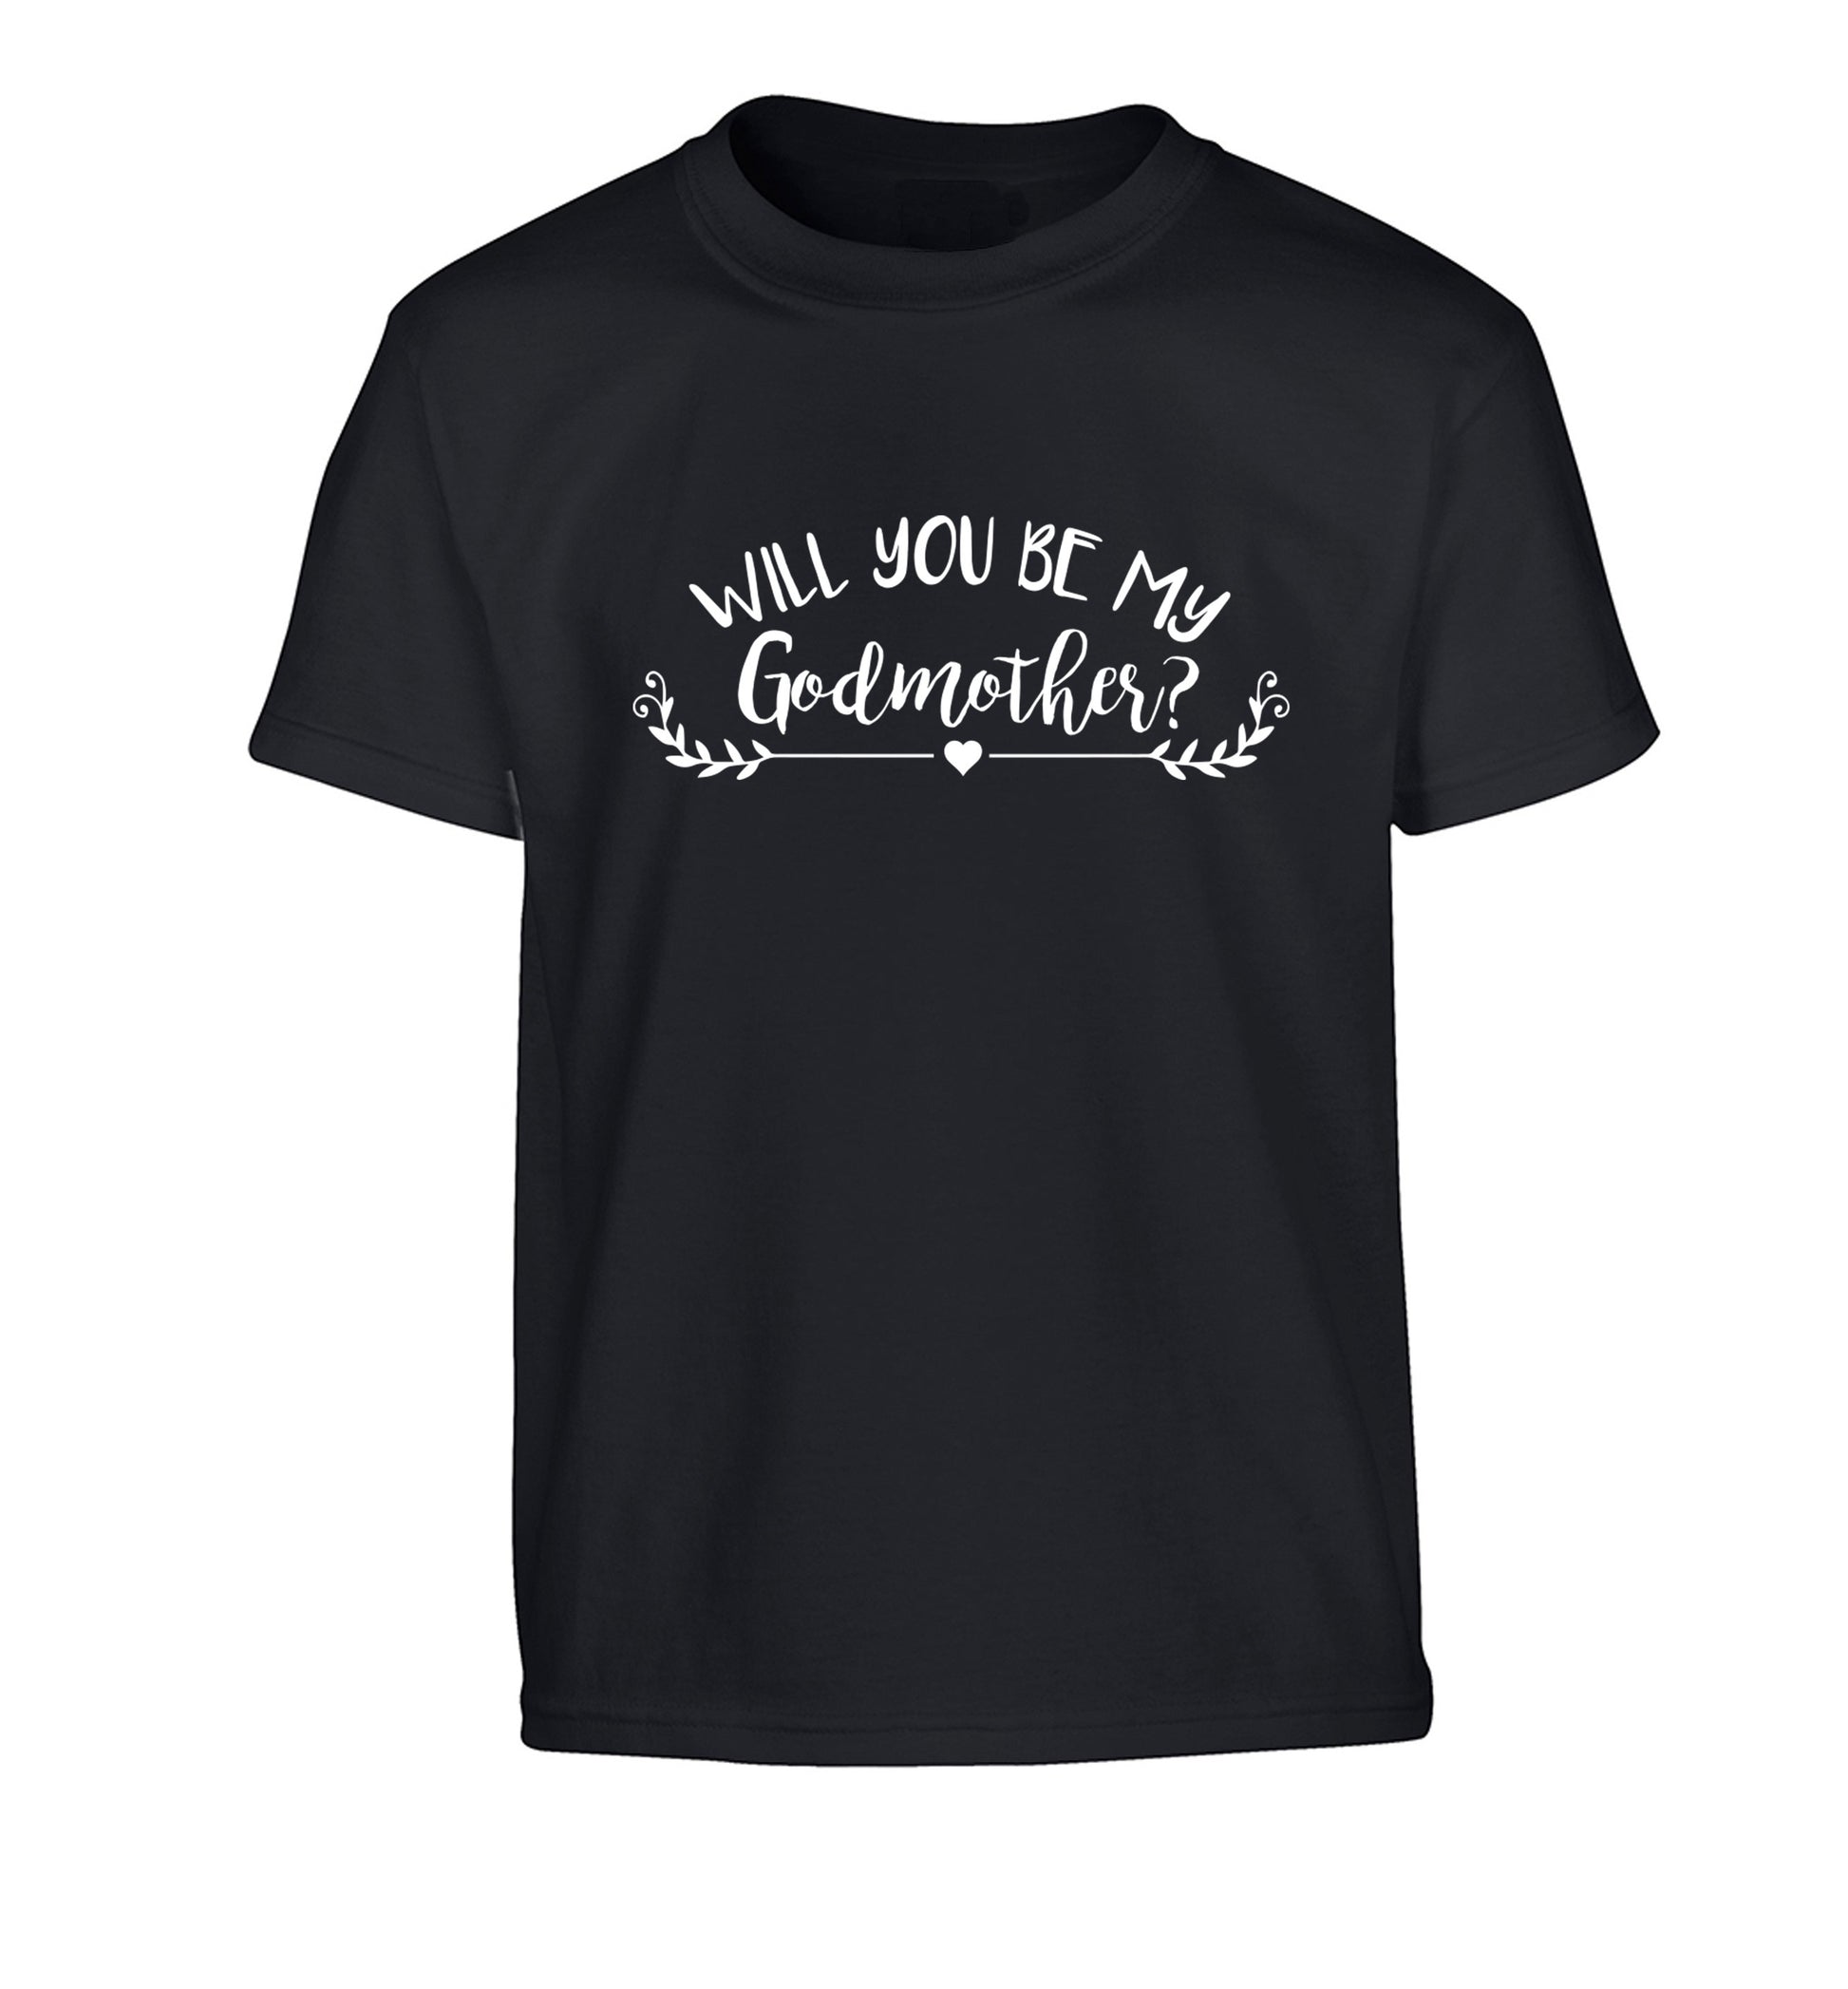 Will you be my godmother? Children's black Tshirt 12-14 Years